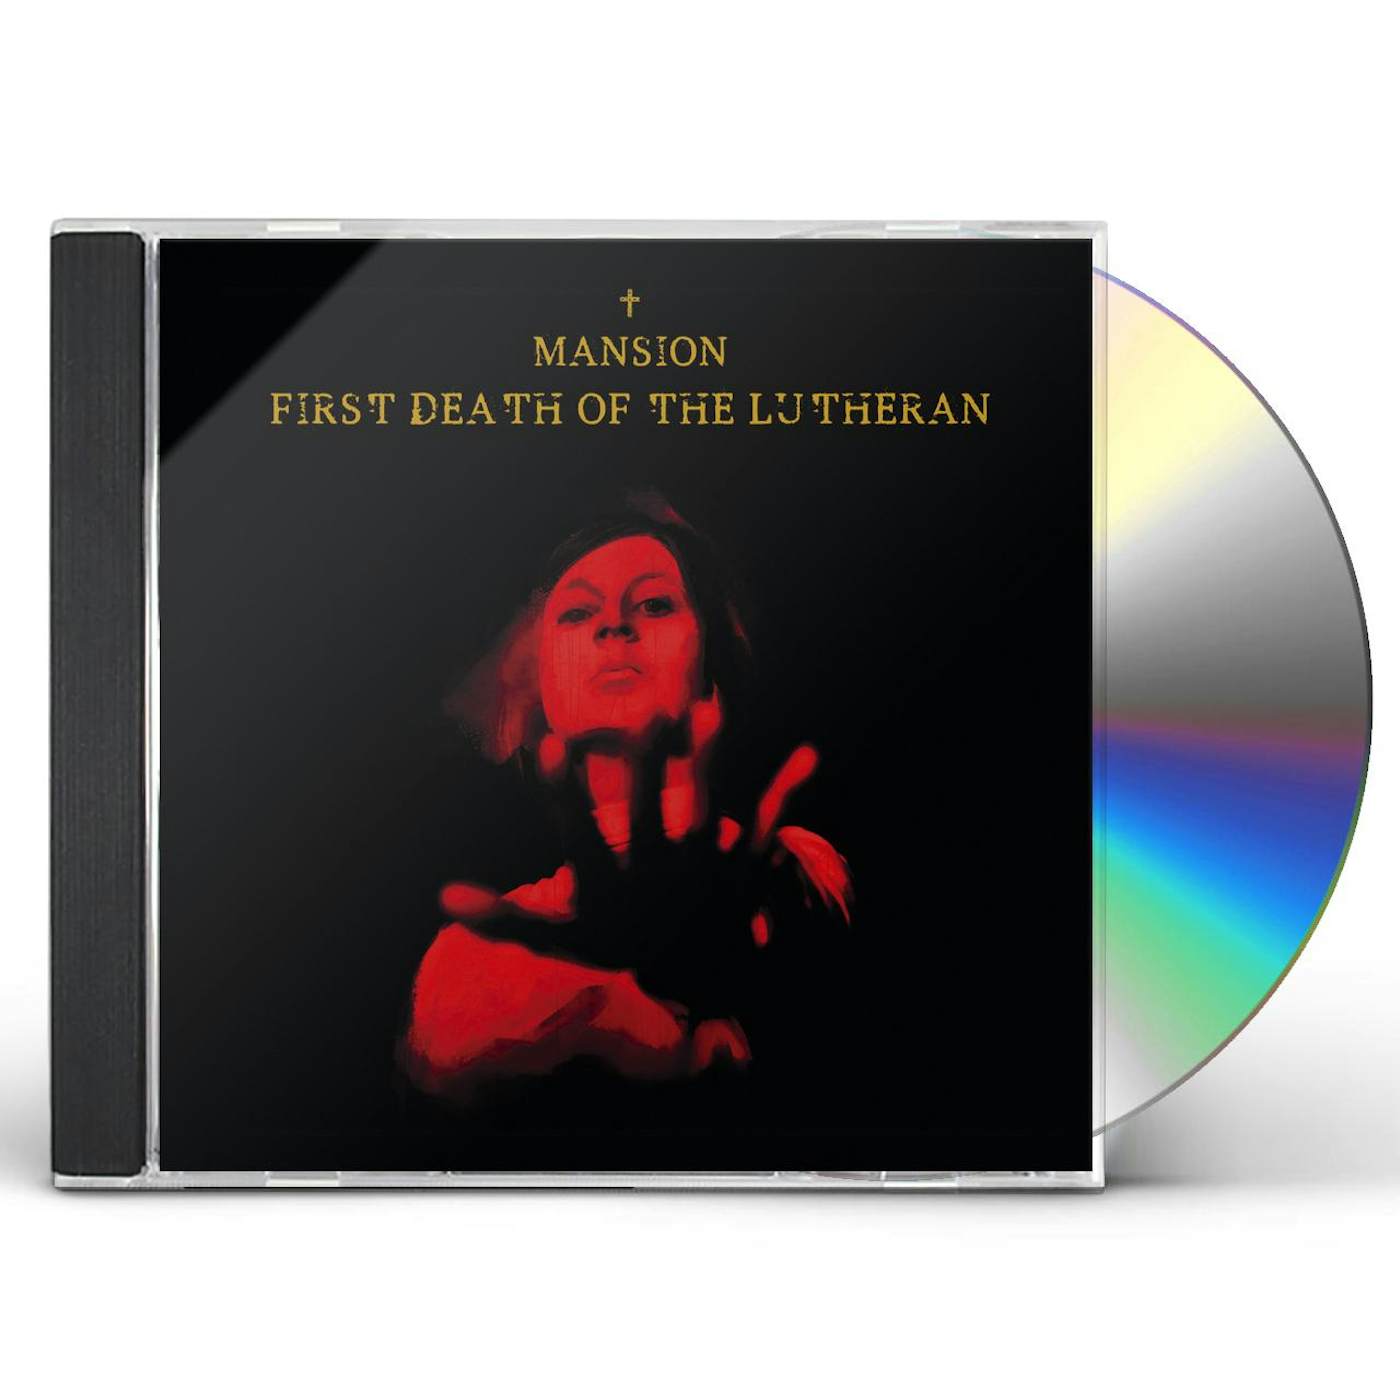 Mansion FIRST DEATH OF THE LUTHERAN CD